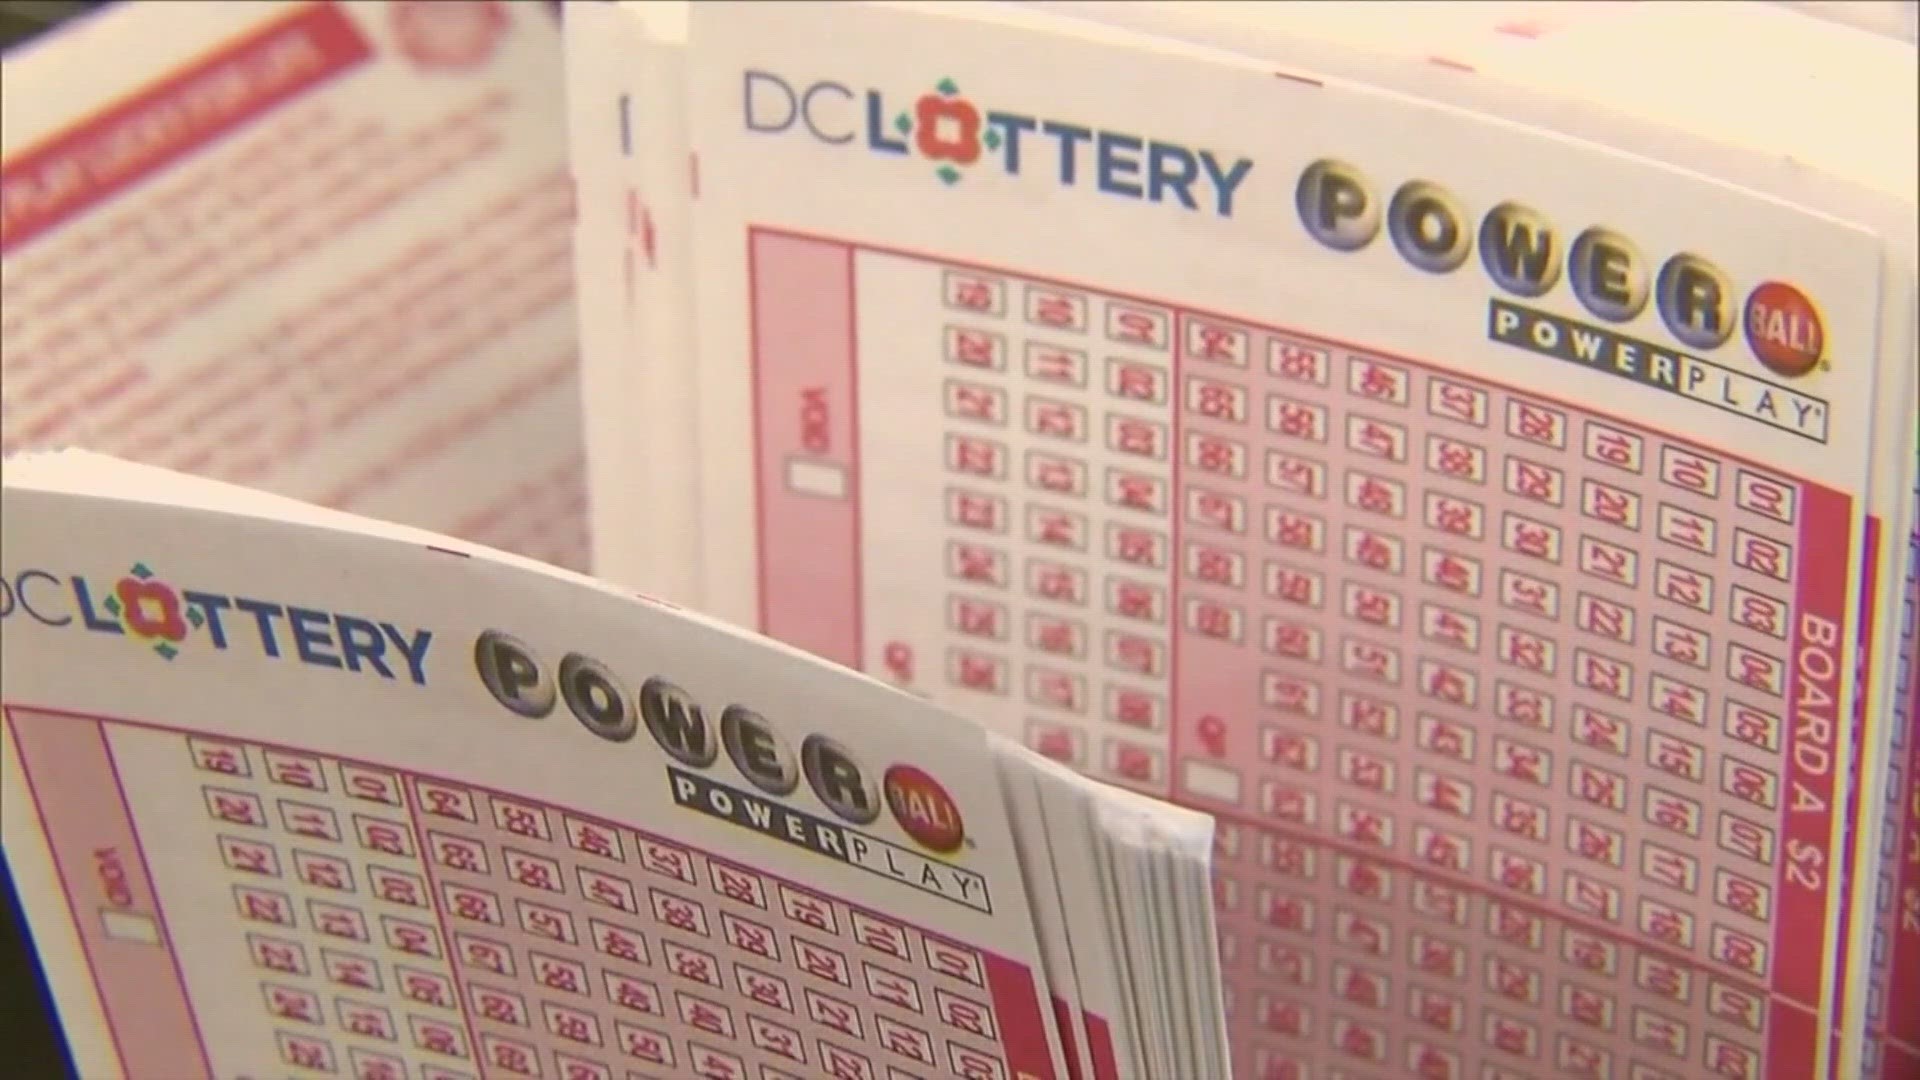 The winning numbers in delayed drawing held on Sunday are 22, 27, 44, 52, 69 with Powerball number 9.